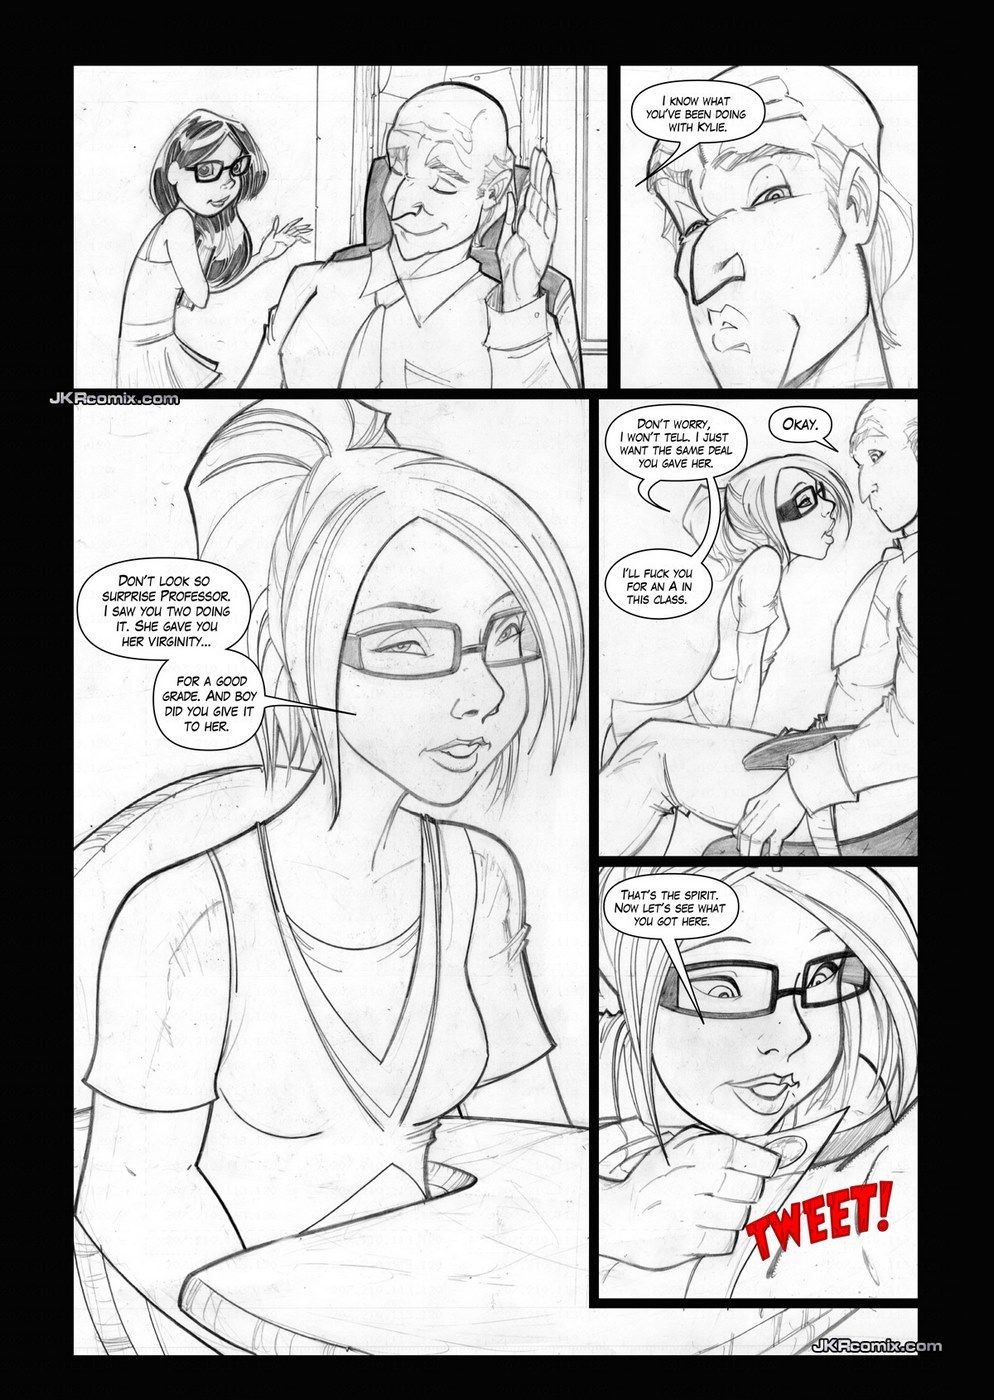 JKRcomix - Give Me An A+ 2-4 Incest page 2